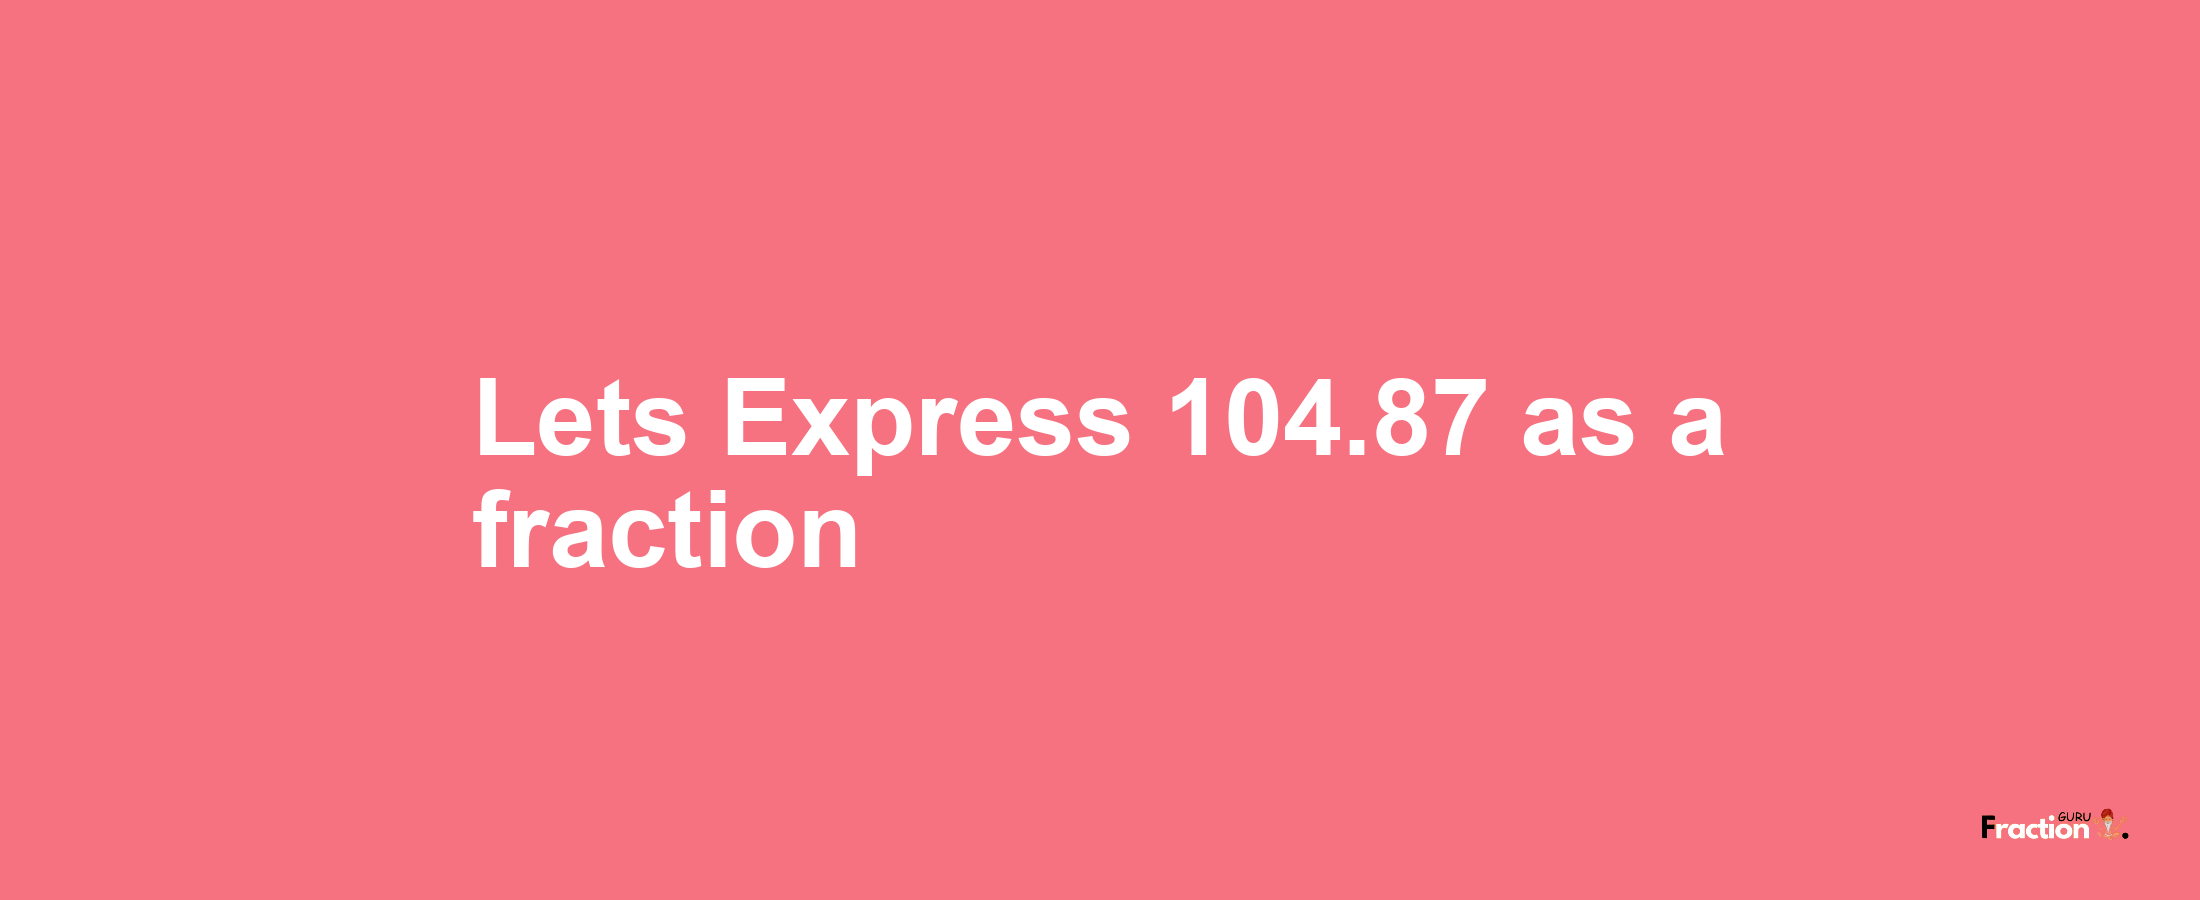 Lets Express 104.87 as afraction